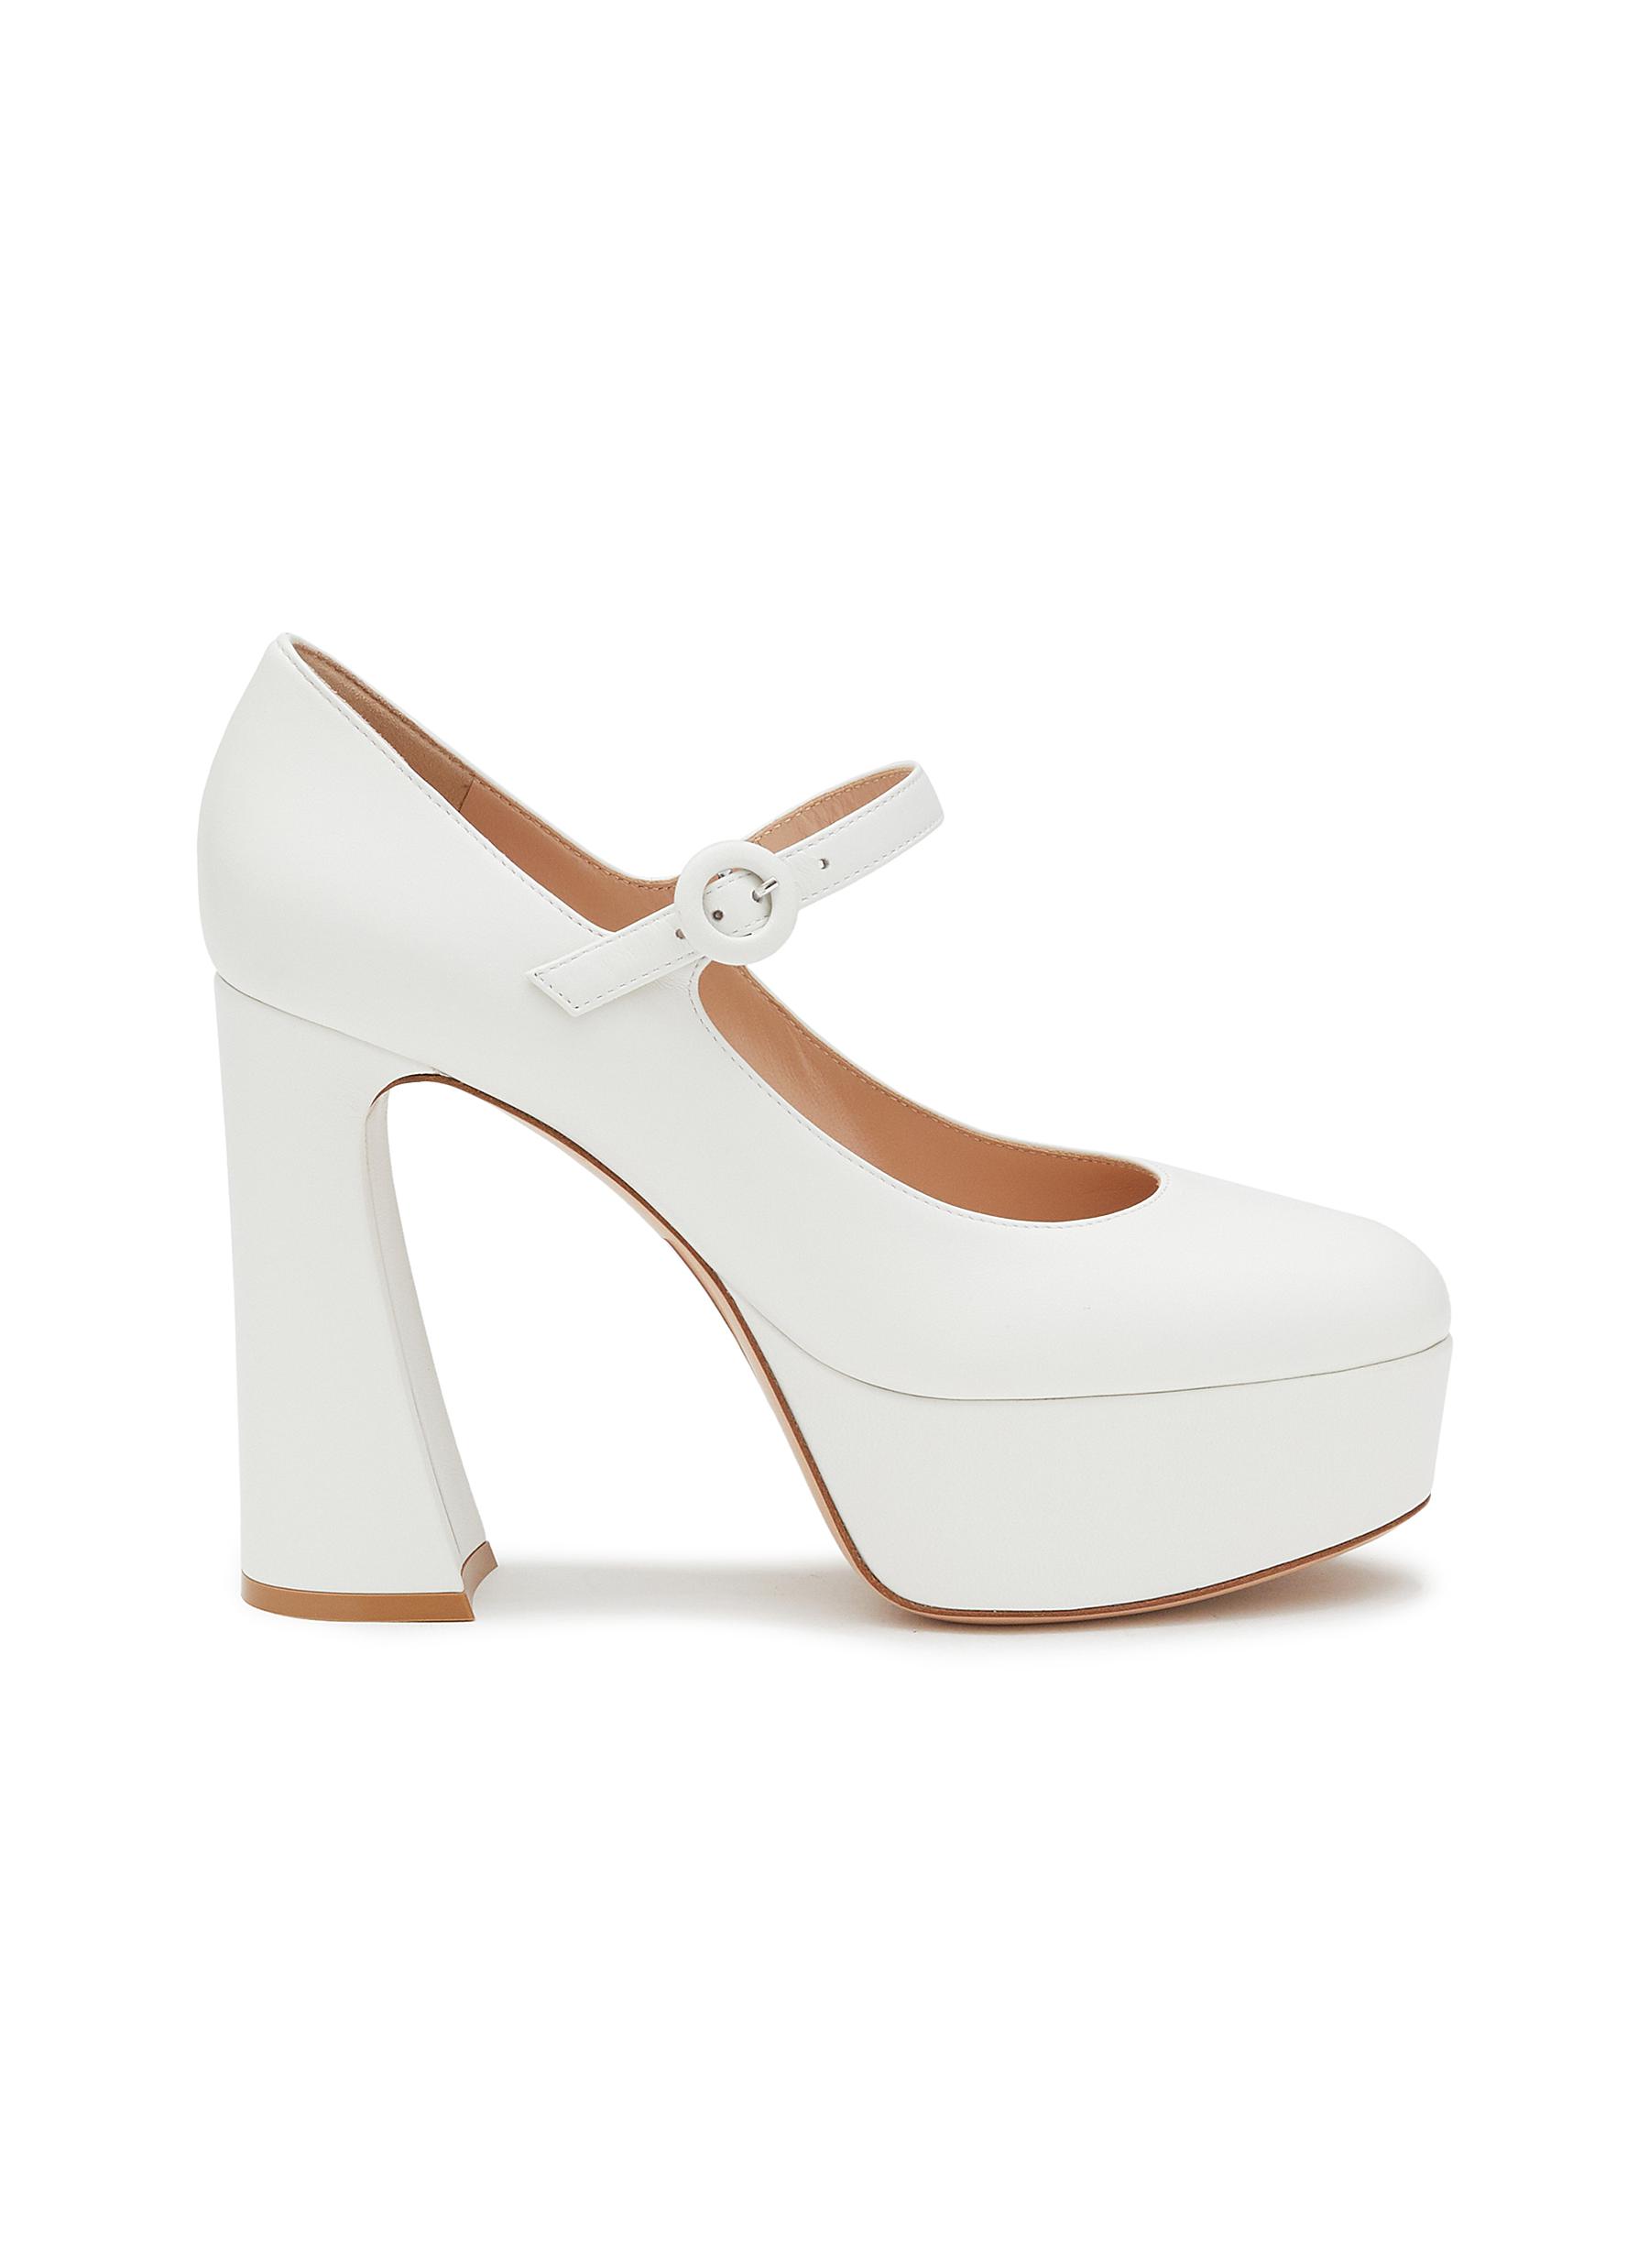 GIANVITO ROSSI 170 LEATHER PLATFORM MARY JANE PUMPS